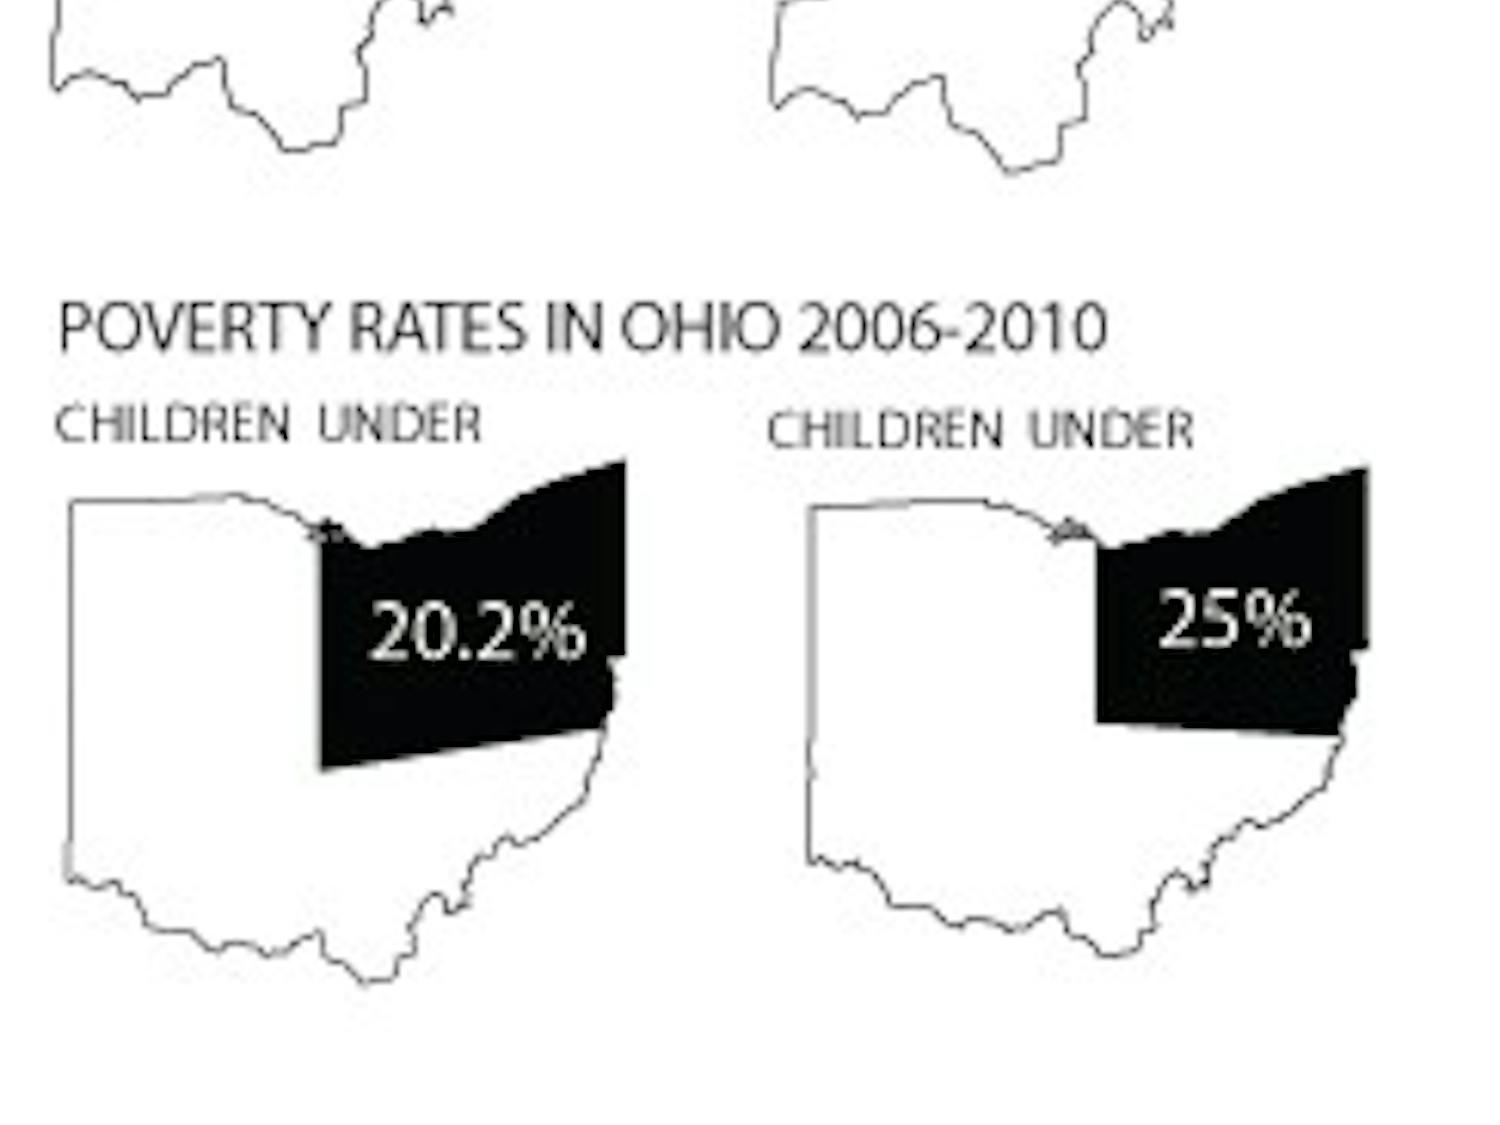 Number of homeless children on the rise in Athens, across Ohio  